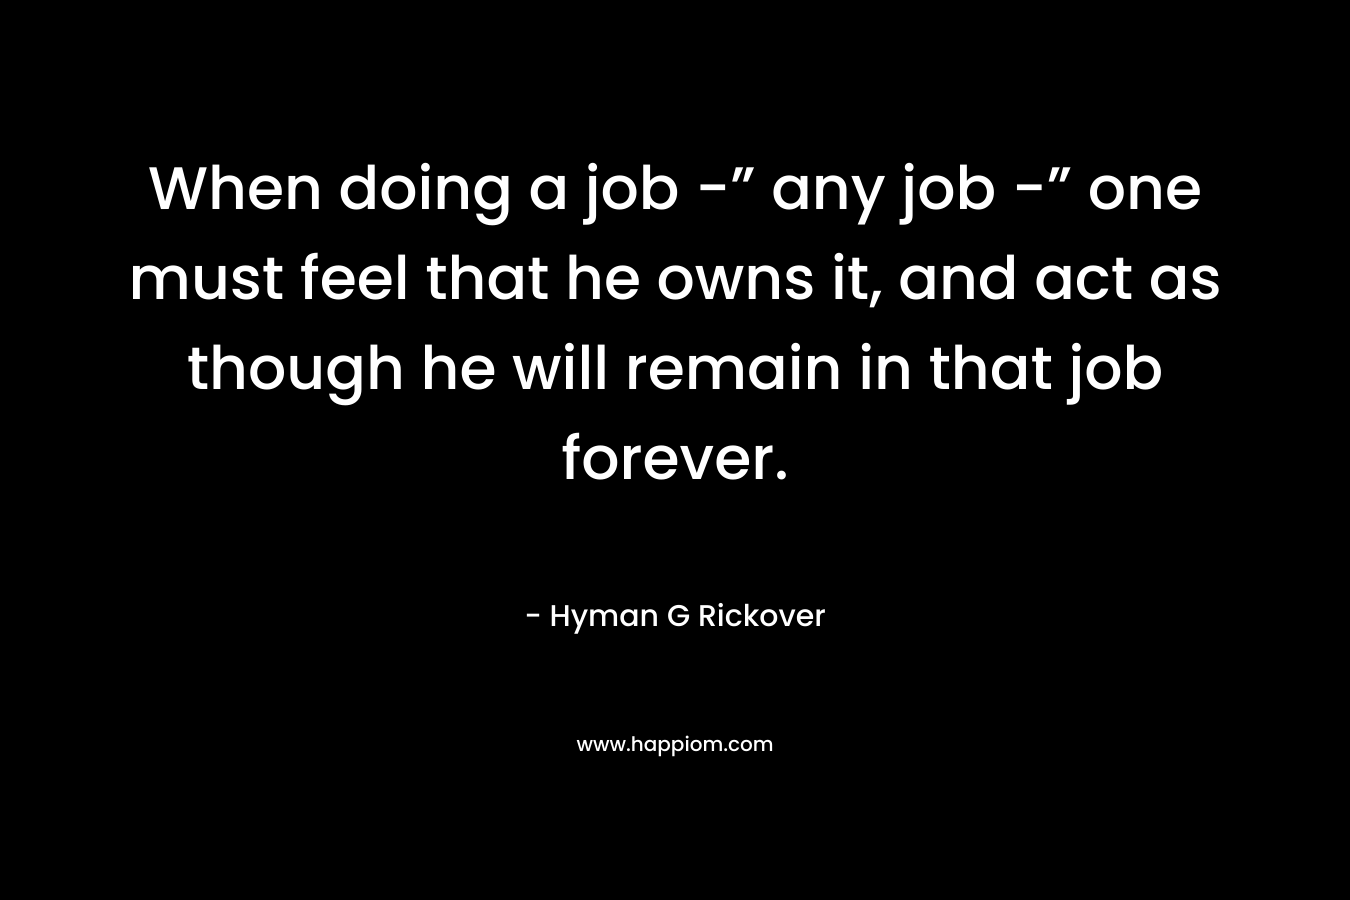 When doing a job -” any job -” one must feel that he owns it, and act as though he will remain in that job forever.